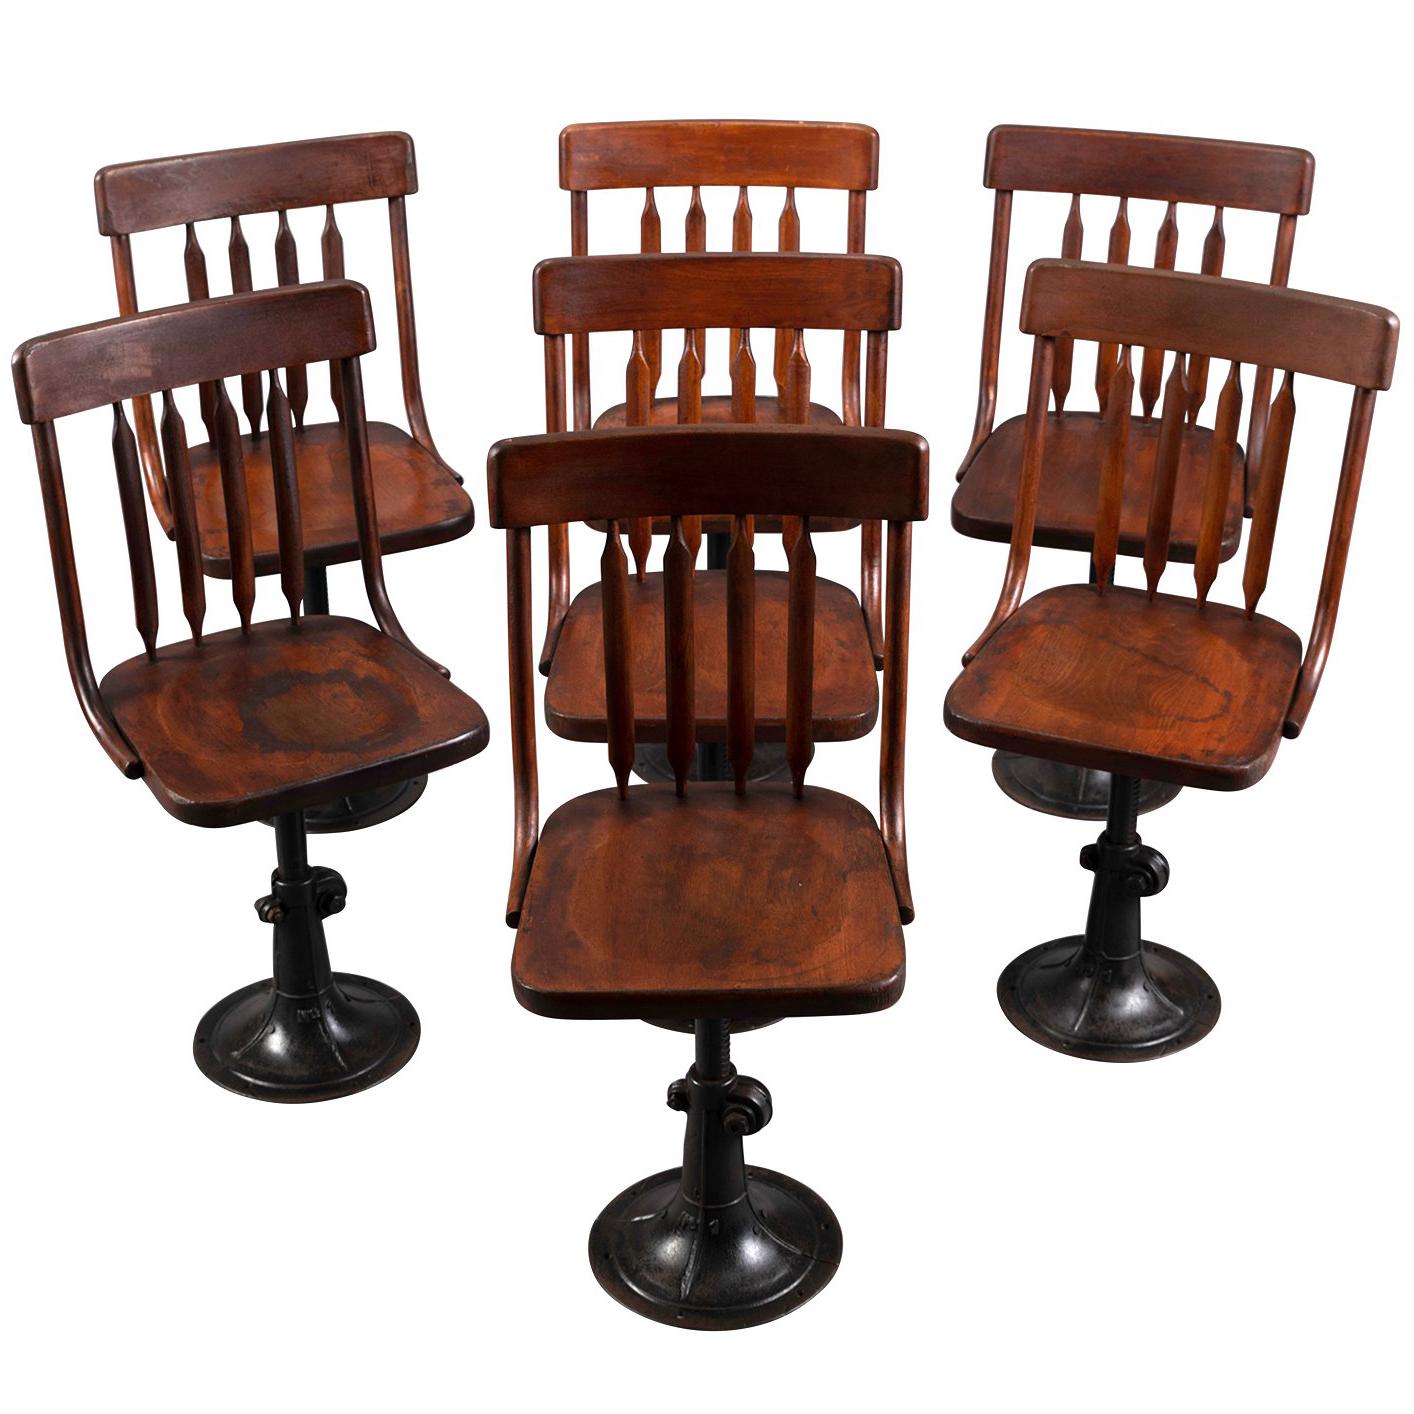 Seven Cast Iron and Wood Adjustable Height Chairs, circa 1895 For Sale